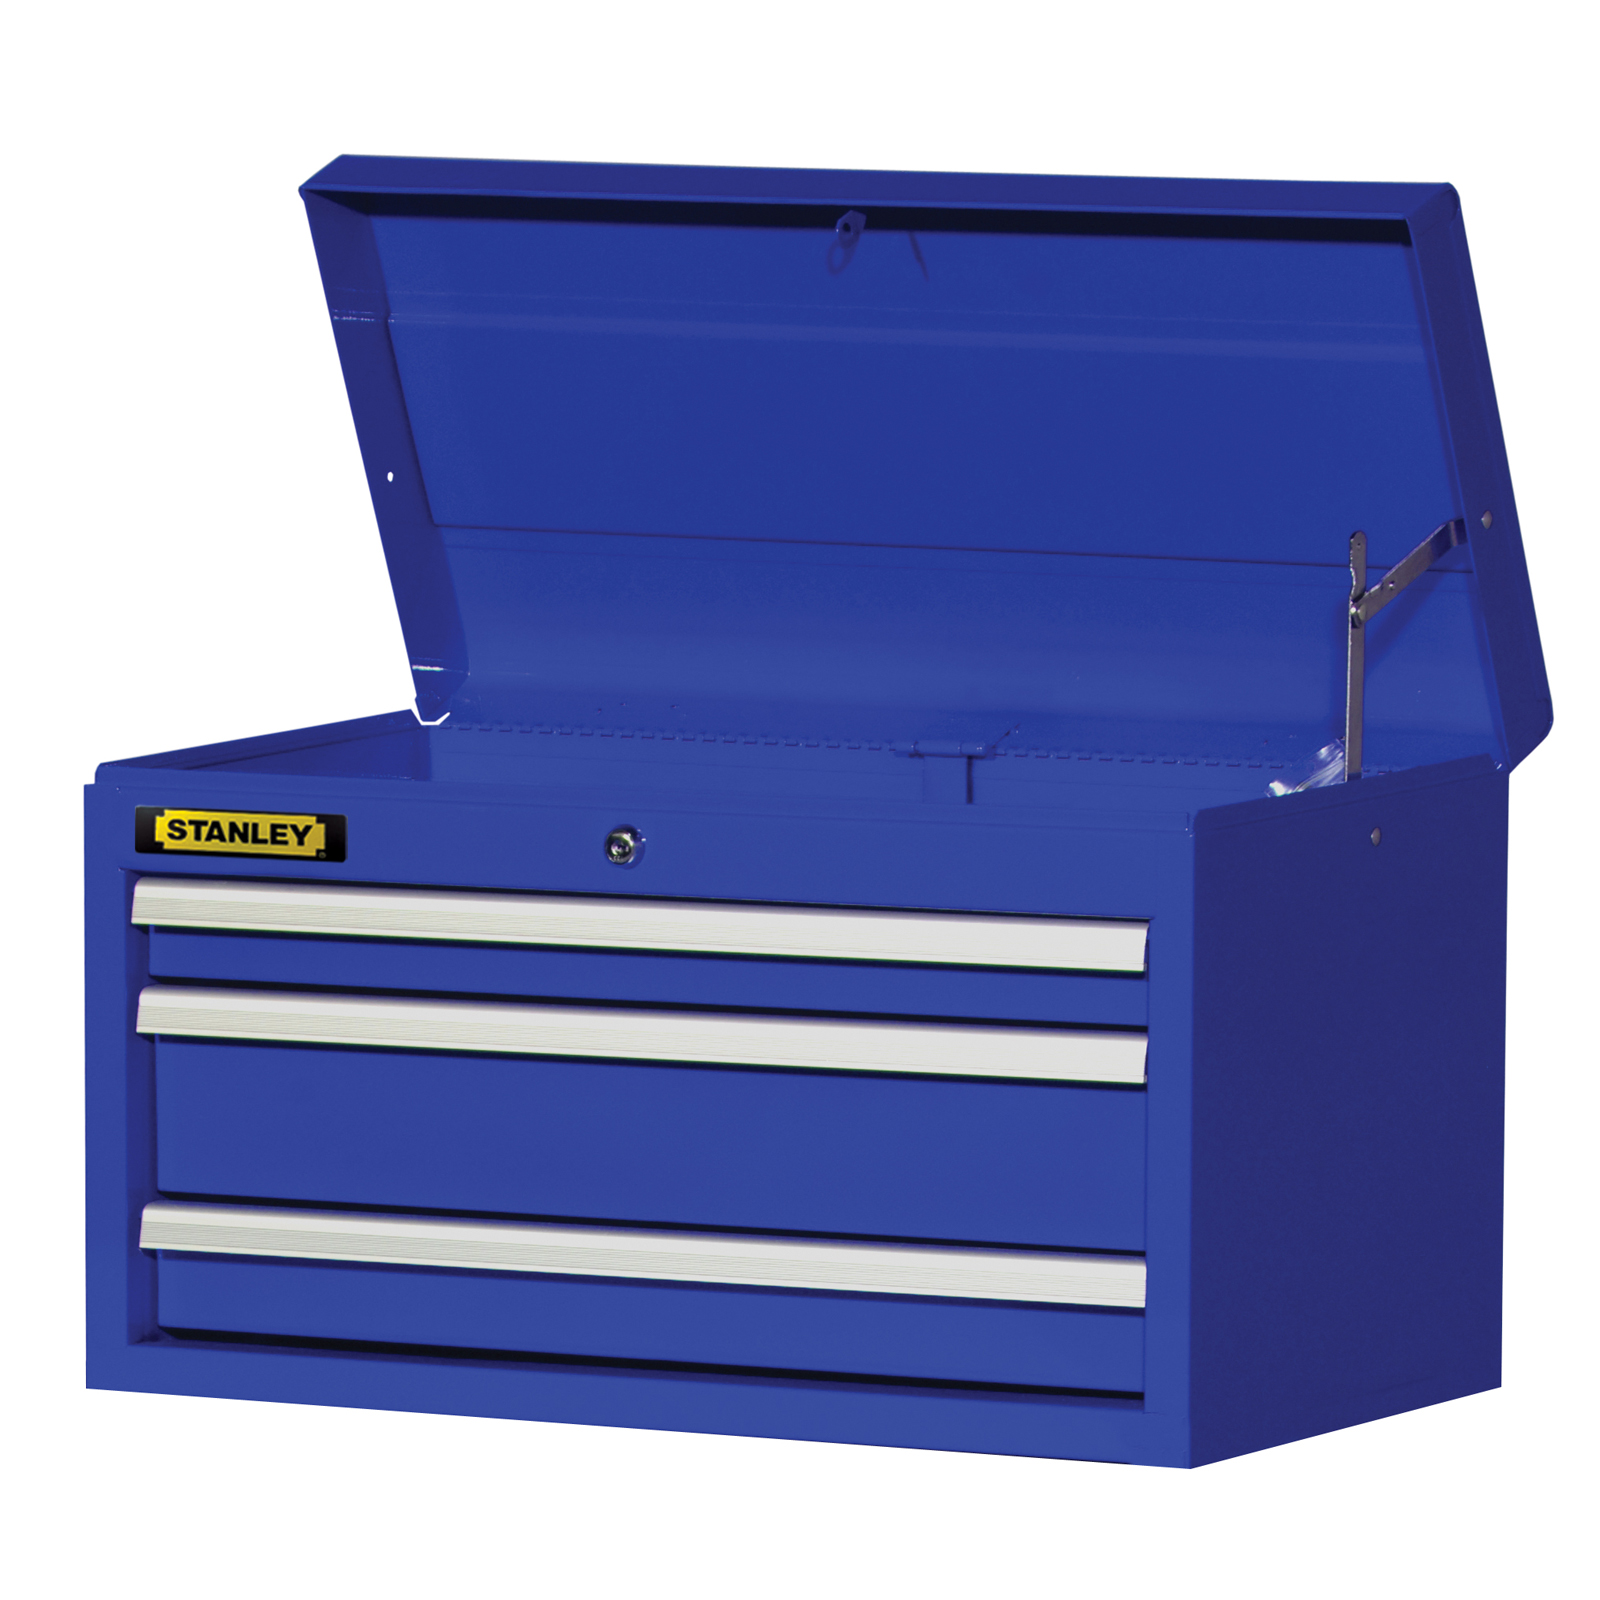 Stanley 27" 3-Drawer Ball Bearing Slides Top Chest, Blue, PLUS FREE SHIPPING